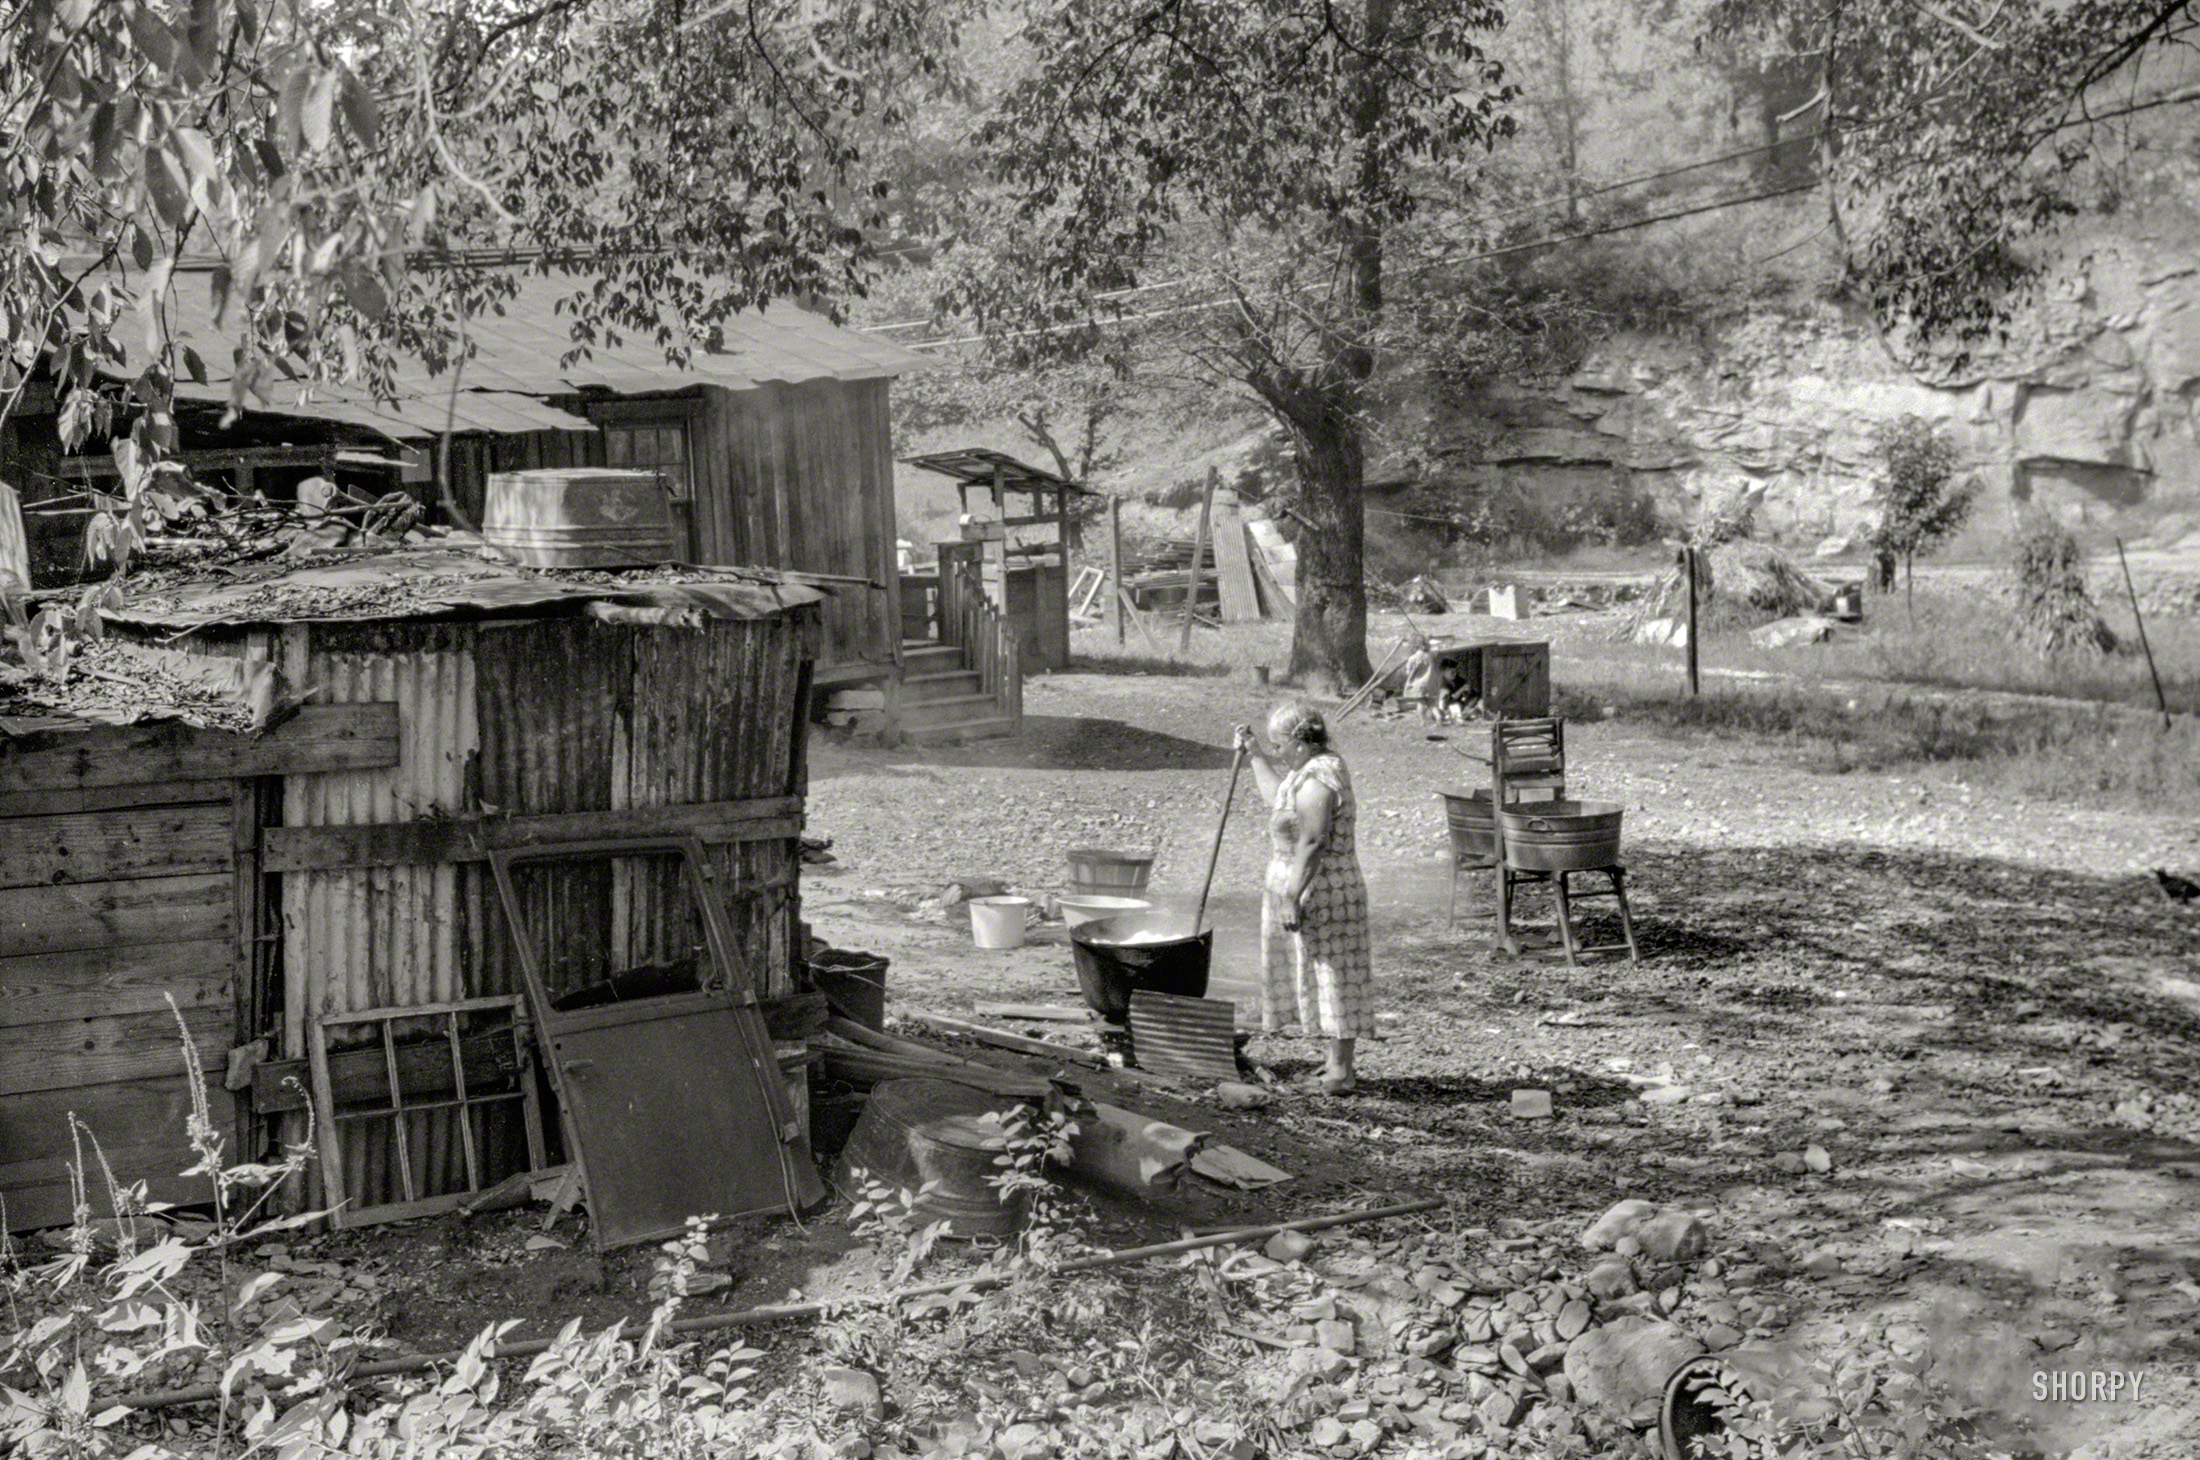 From September 1938, a reminder of the days when doing laundry meant hauling water from a well or spigot, then boiling it in a caldron over a fire: "Old and sick, mine foreman's wife does washing in front yard. South Charleston, W.Va." Photo by Marion Post Wolcott for the Resettlement Administration. View full size.